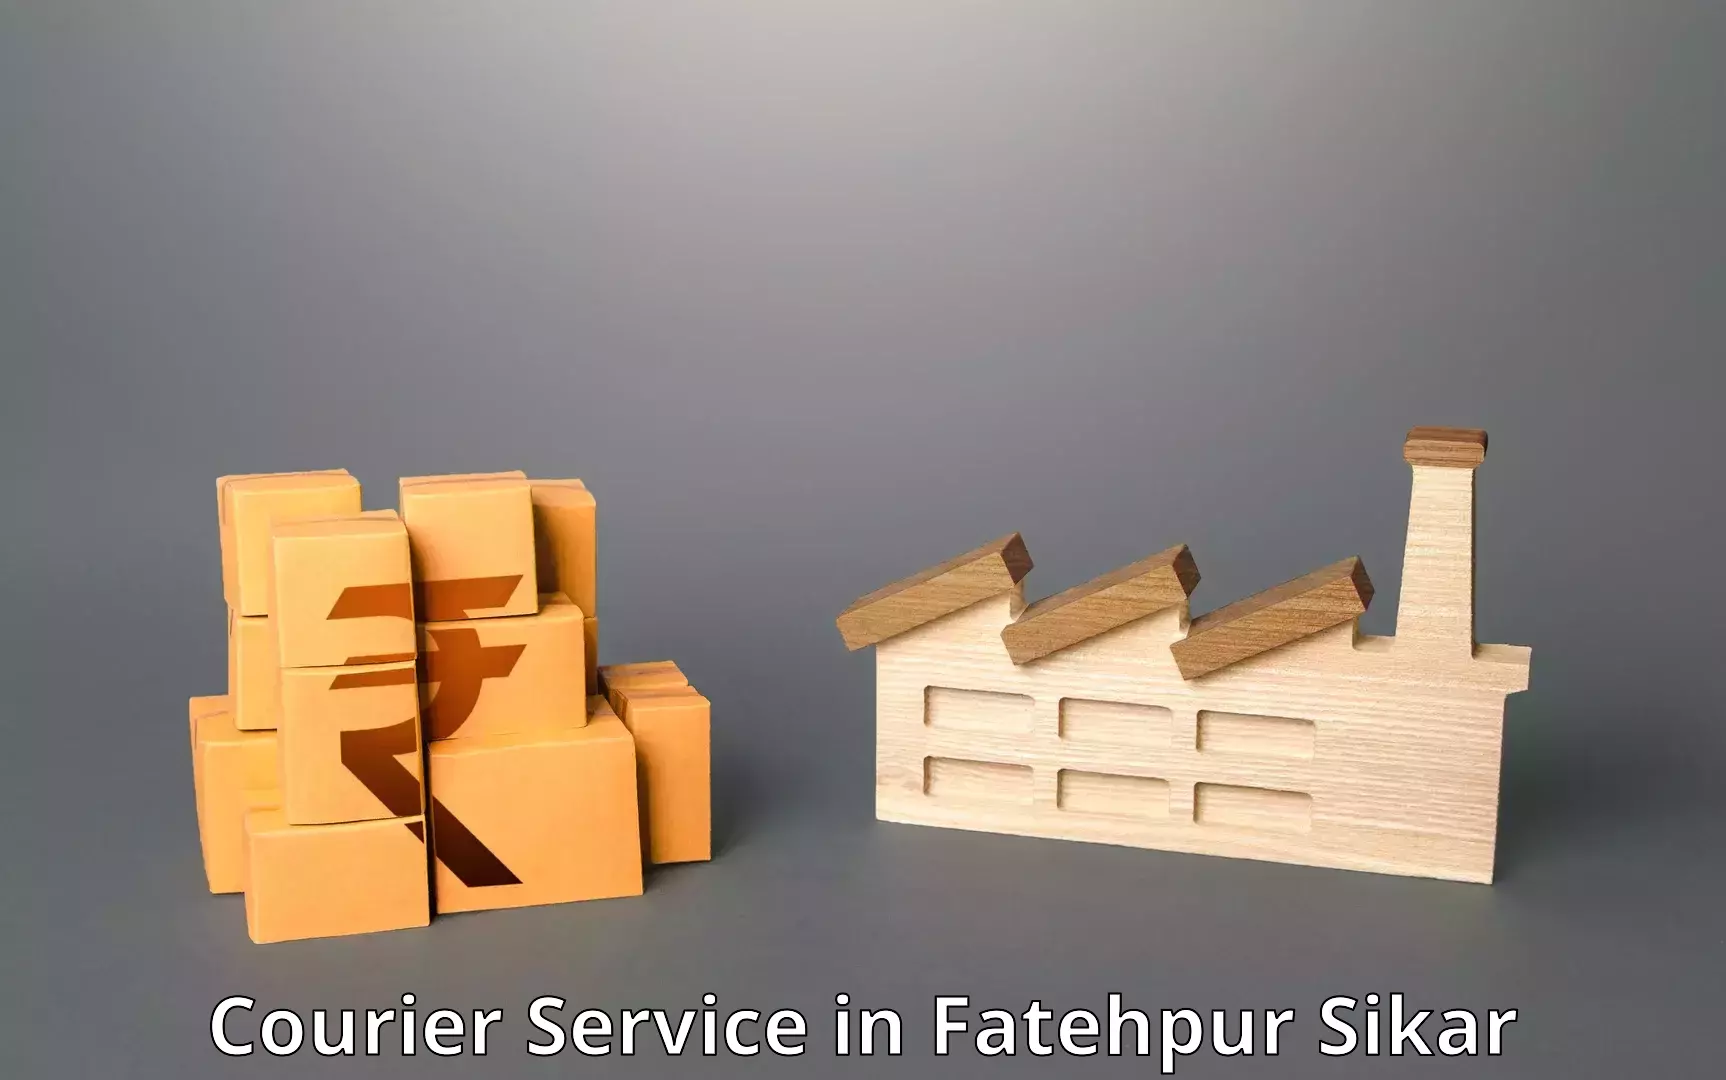 24-hour delivery options in Fatehpur Sikar